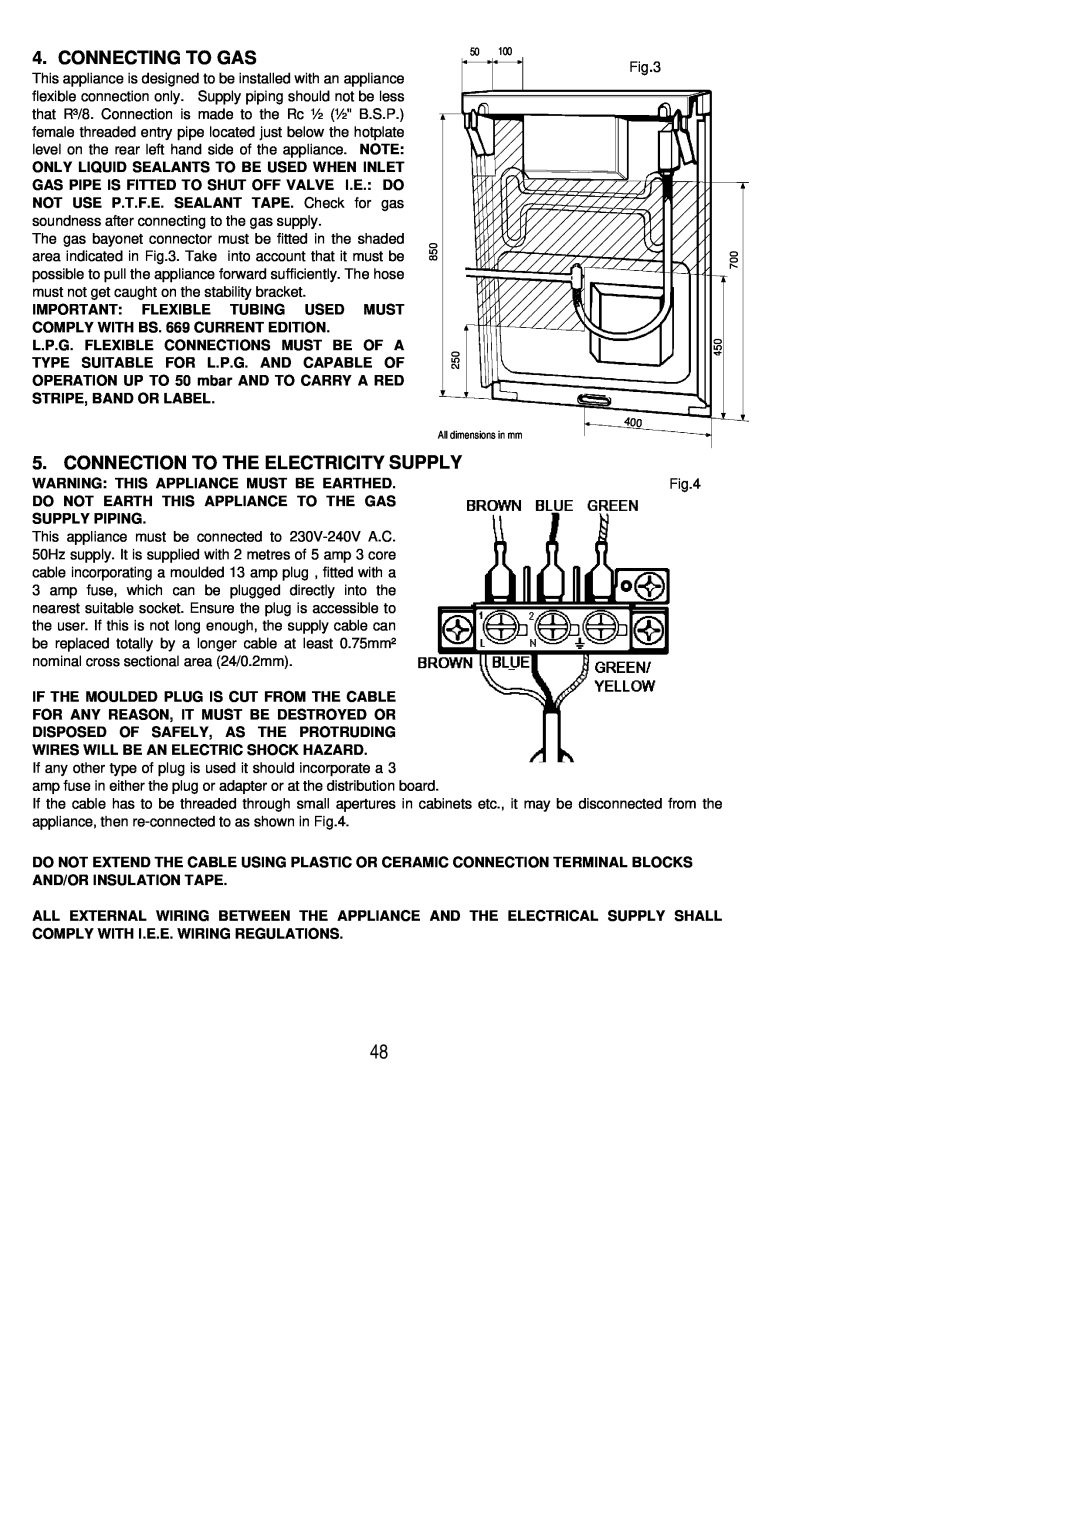 Electrolux SIG 556 installation instructions Connecting To Gas, Connection To The Electricity Supply 